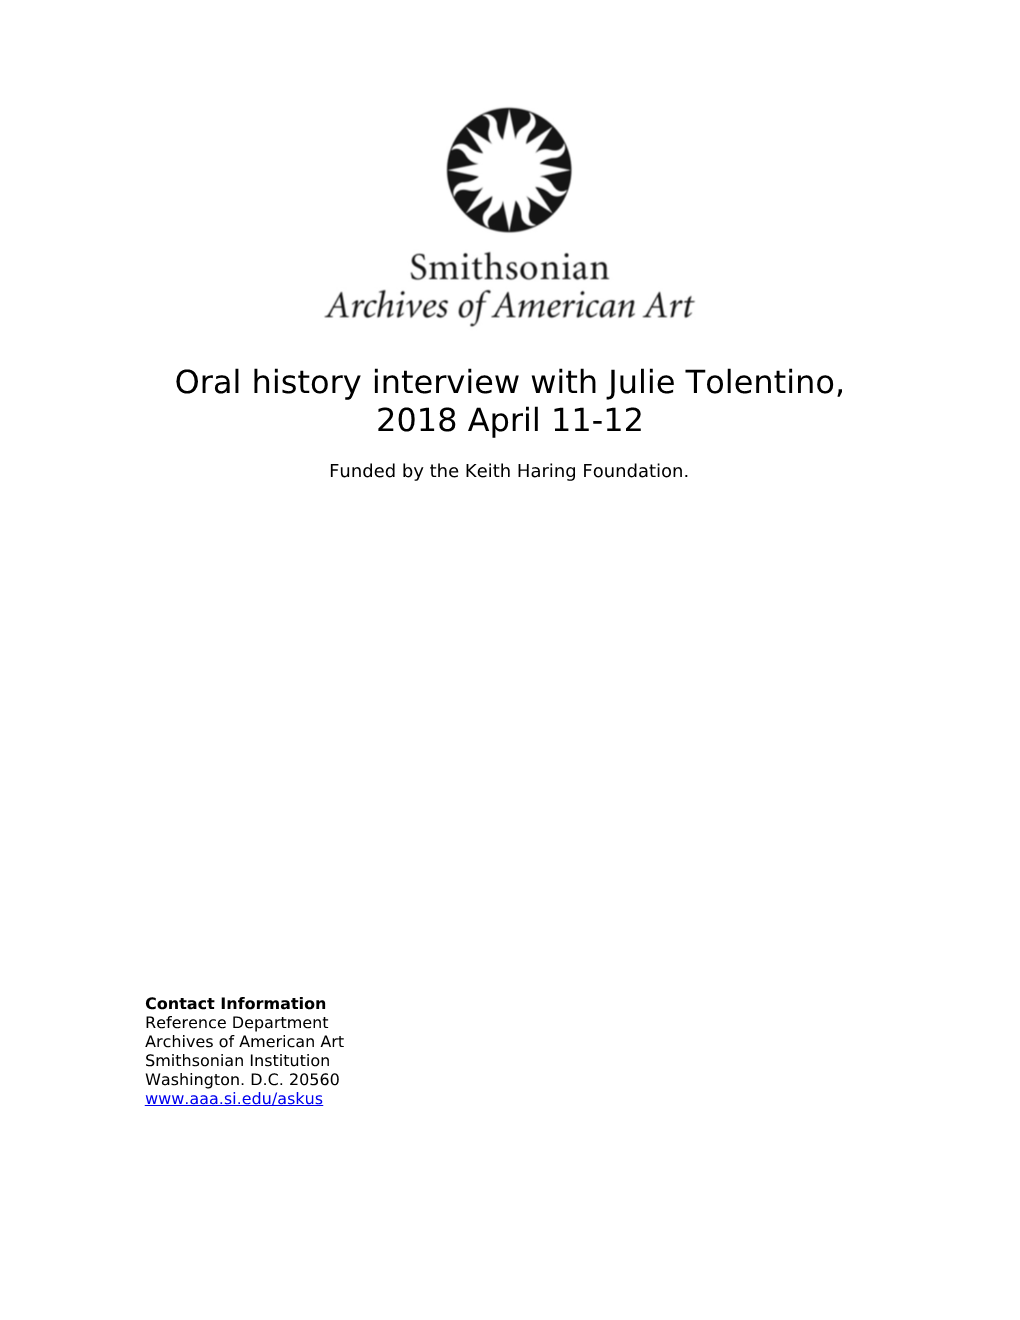 Oral History Interview with Julie Tolentino, 2018 April 11-12